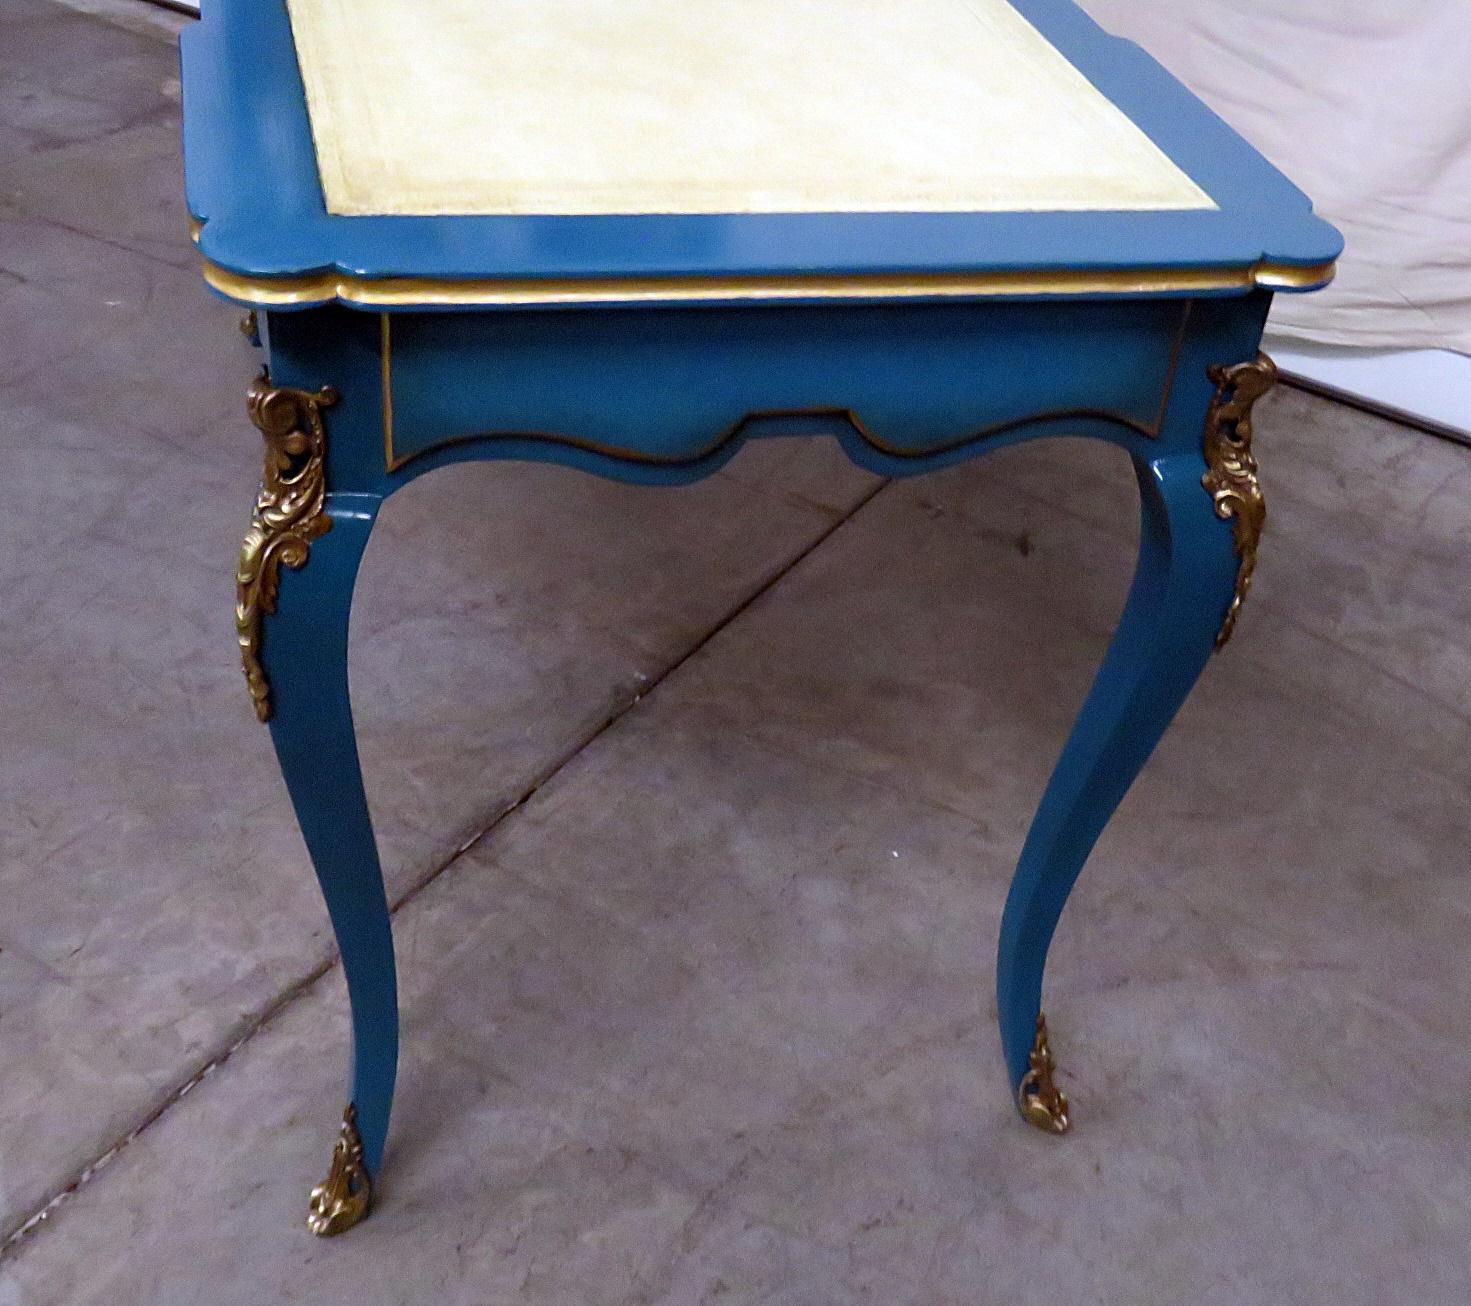 Attributed to Maison Jansen, This beautiful French blue painted desk is like a jewel. The Louis XV style lacquered leather top Cartonnier desk with gilt accents has utility and chic design blended together. The top contains 2 doors with 2 shelves